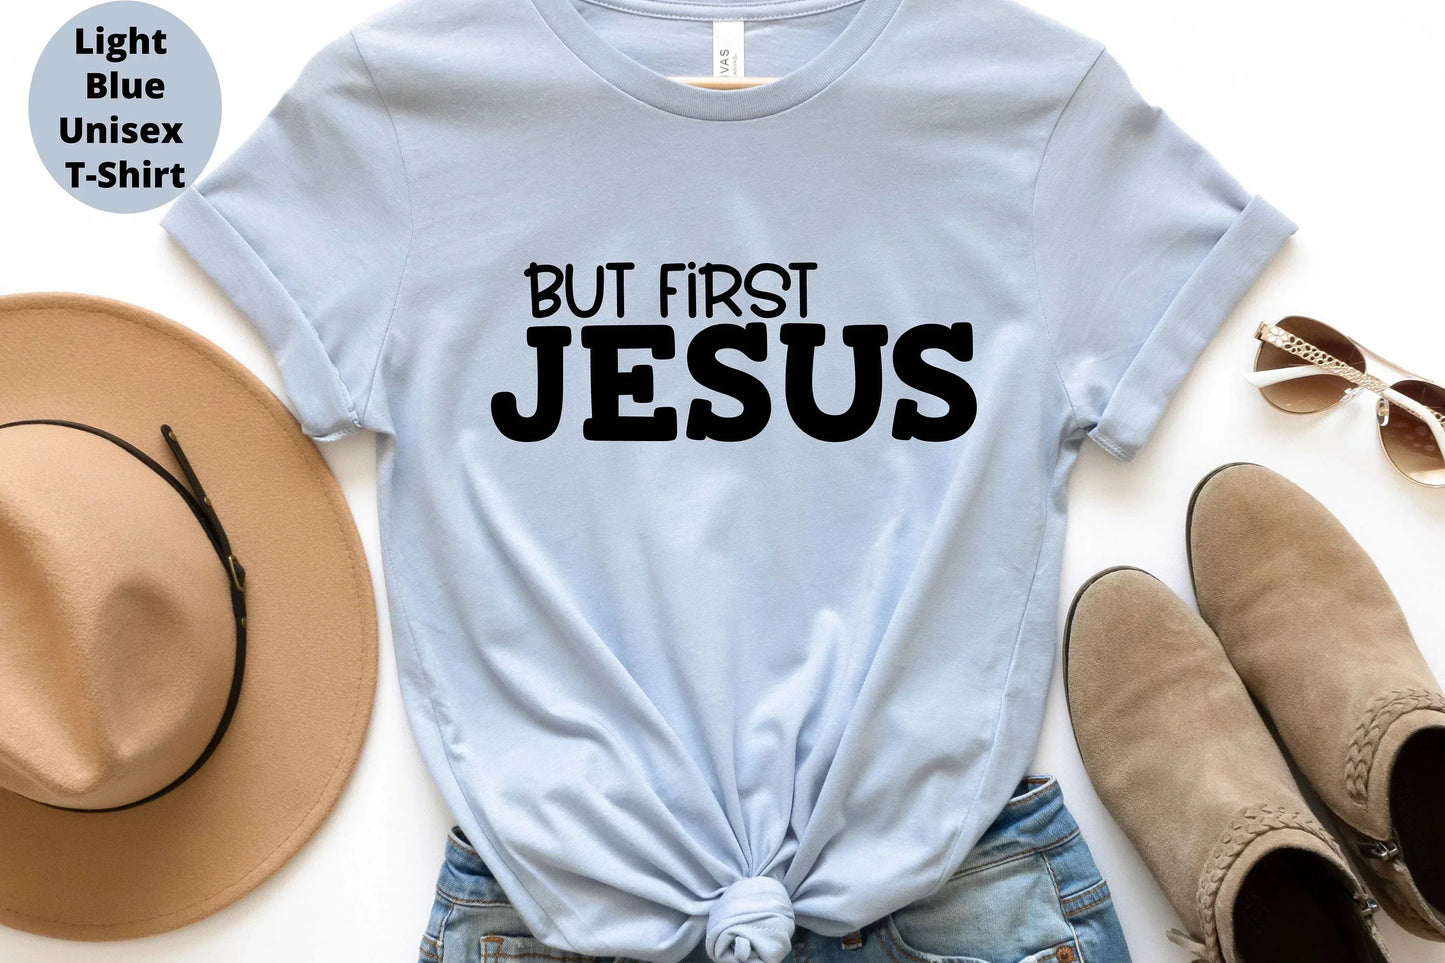 But First Jesus, Comfortable Christian Shirt about God